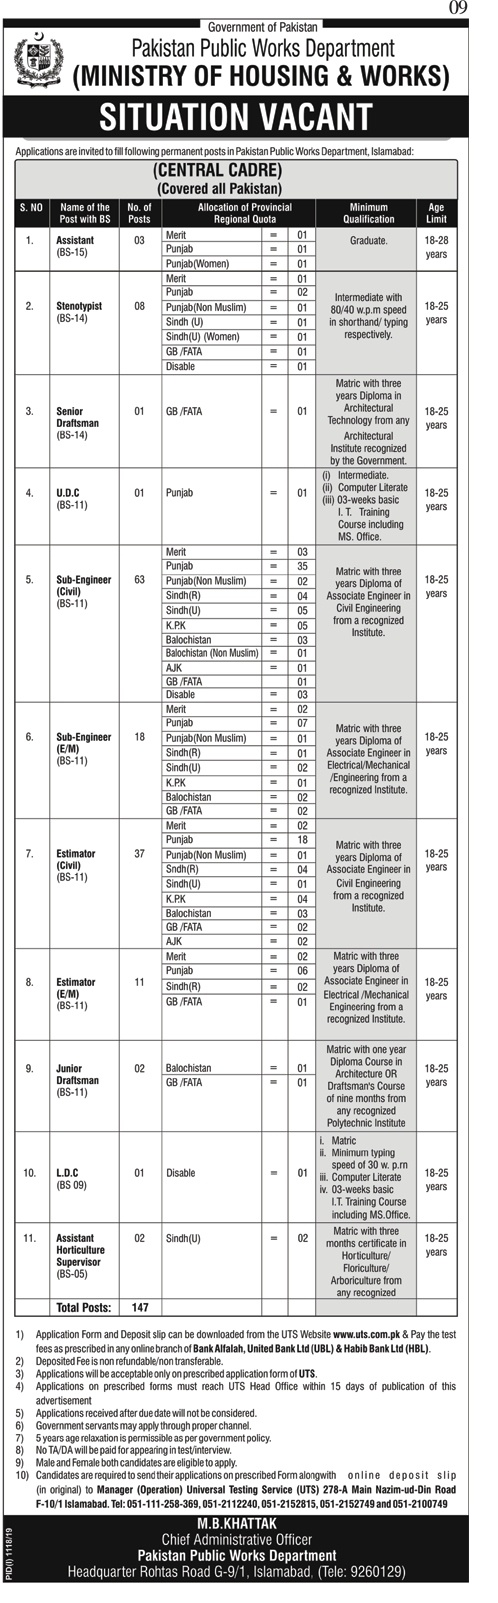 Vacancies in Ministry of Housing & Works 2019